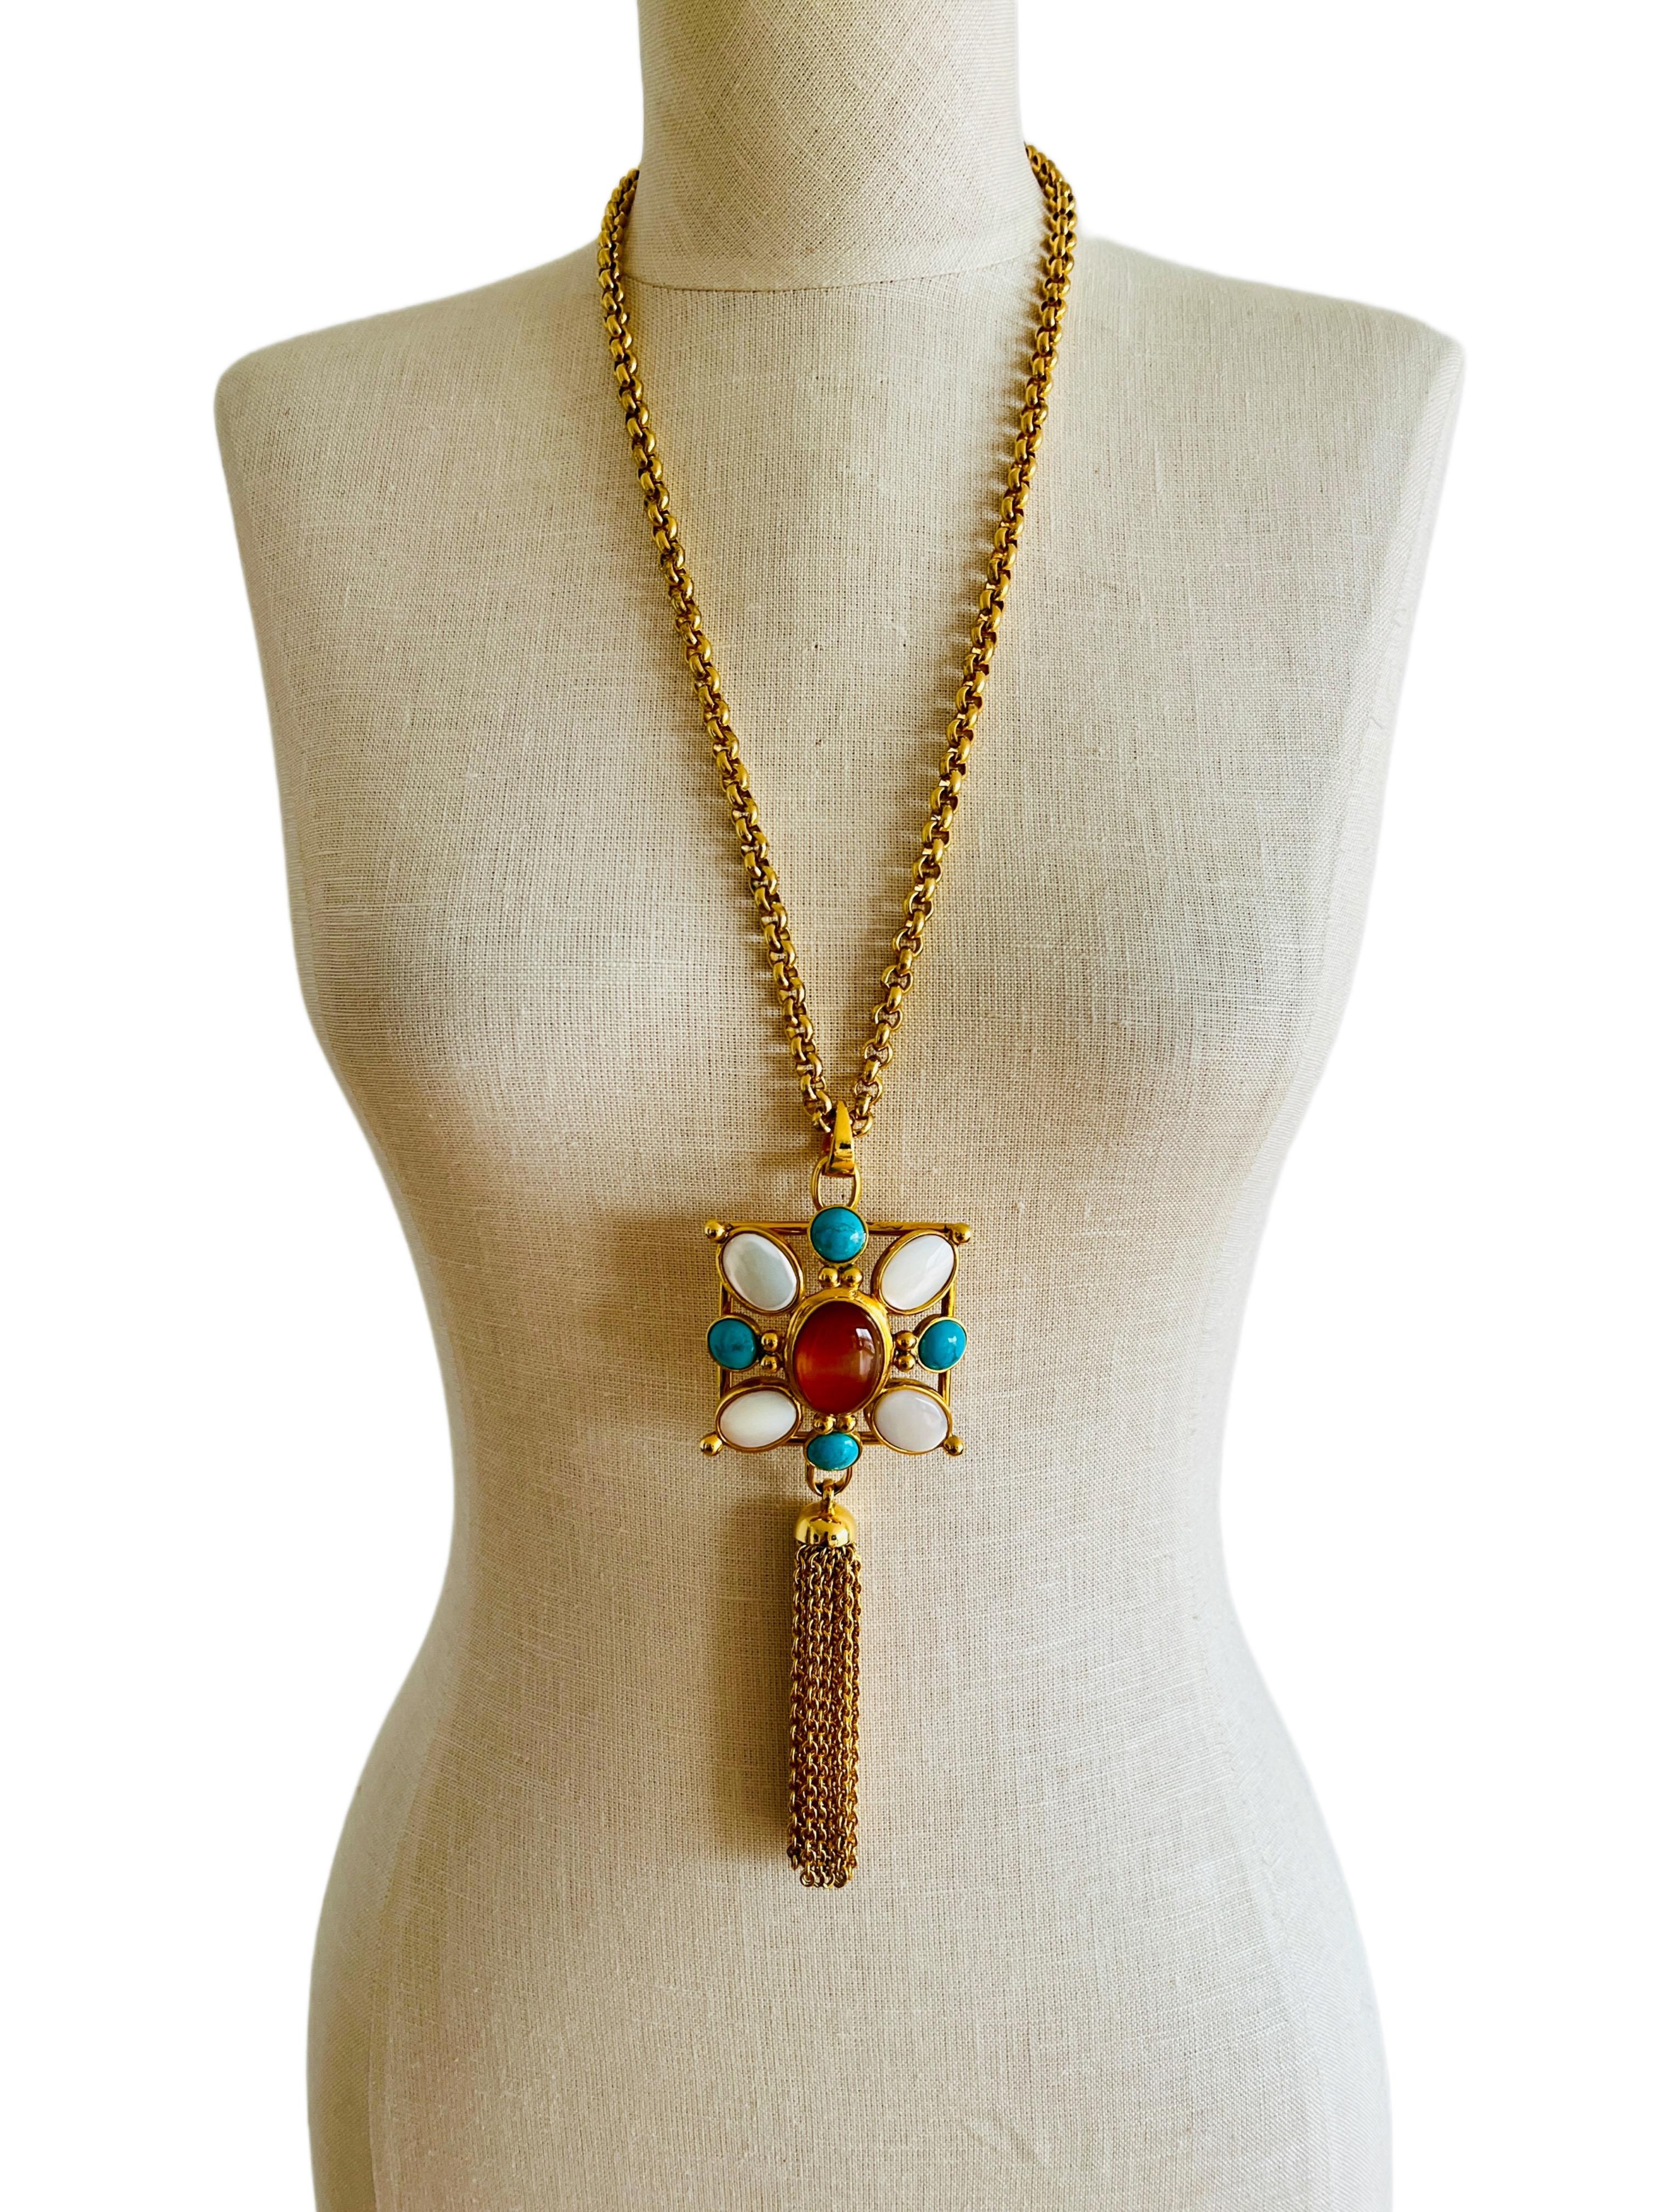 Elevate your haute couture, runway, and statement look with this fabulous square pendant tassel necklace that features natural carnelian, turquoise and mother-of-pearl by designer Jose & Maria Barrera.  

Designer: Jose & Maria Barrera.
Size: The